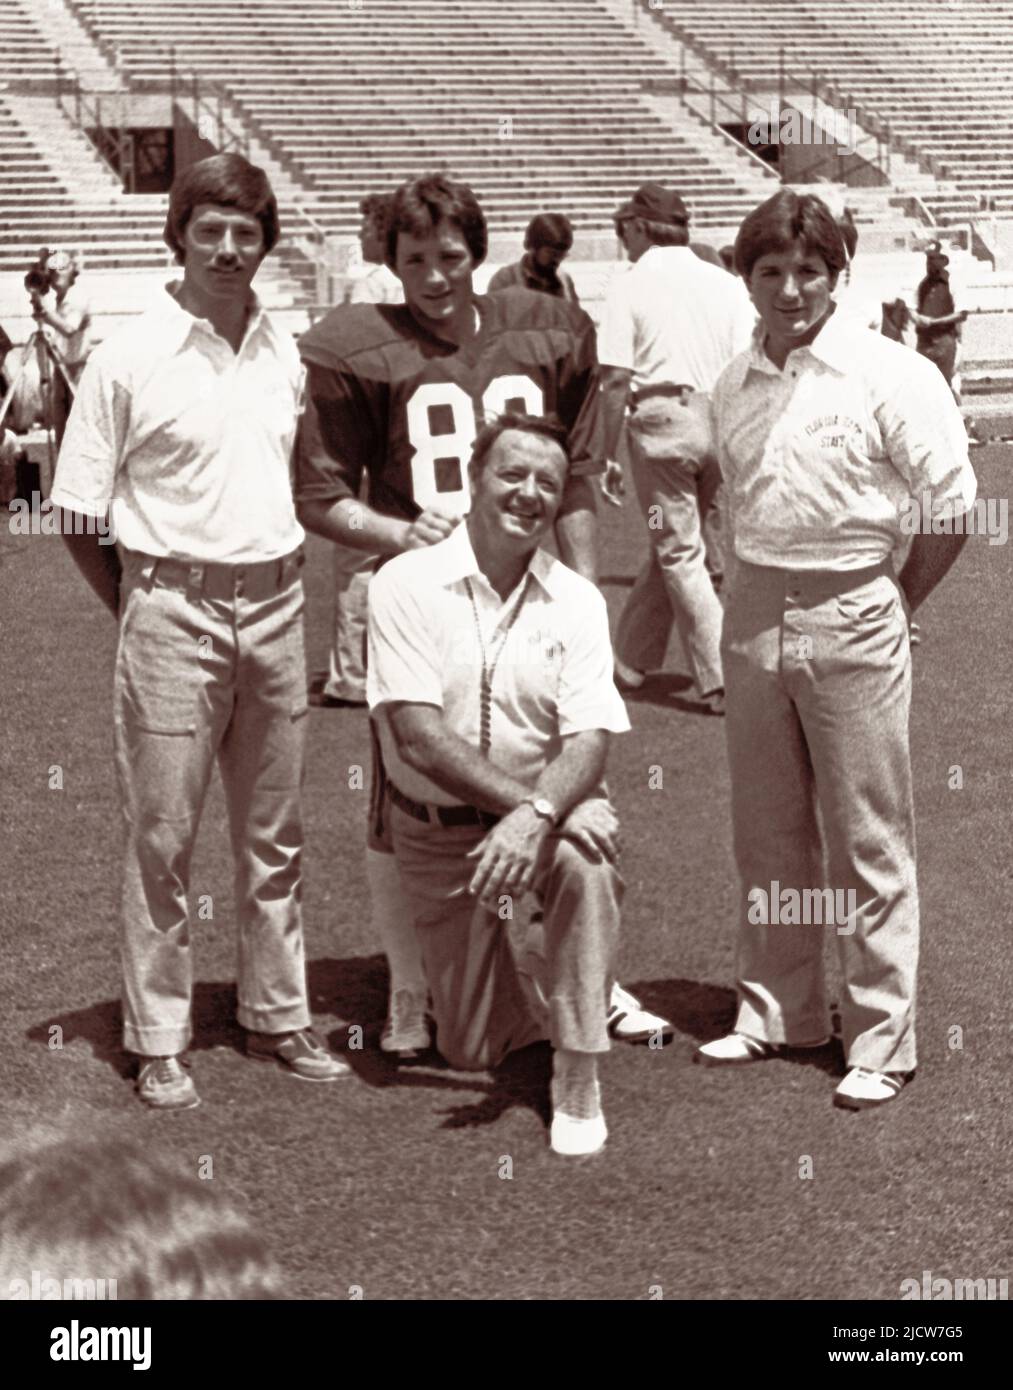 FSU head football coach Bobby Bowden and sons (L-R) Tommy, Jeff, and Terry at Florida State University's Doak Campbell Stadium in 1982. (USA) Stock Photo